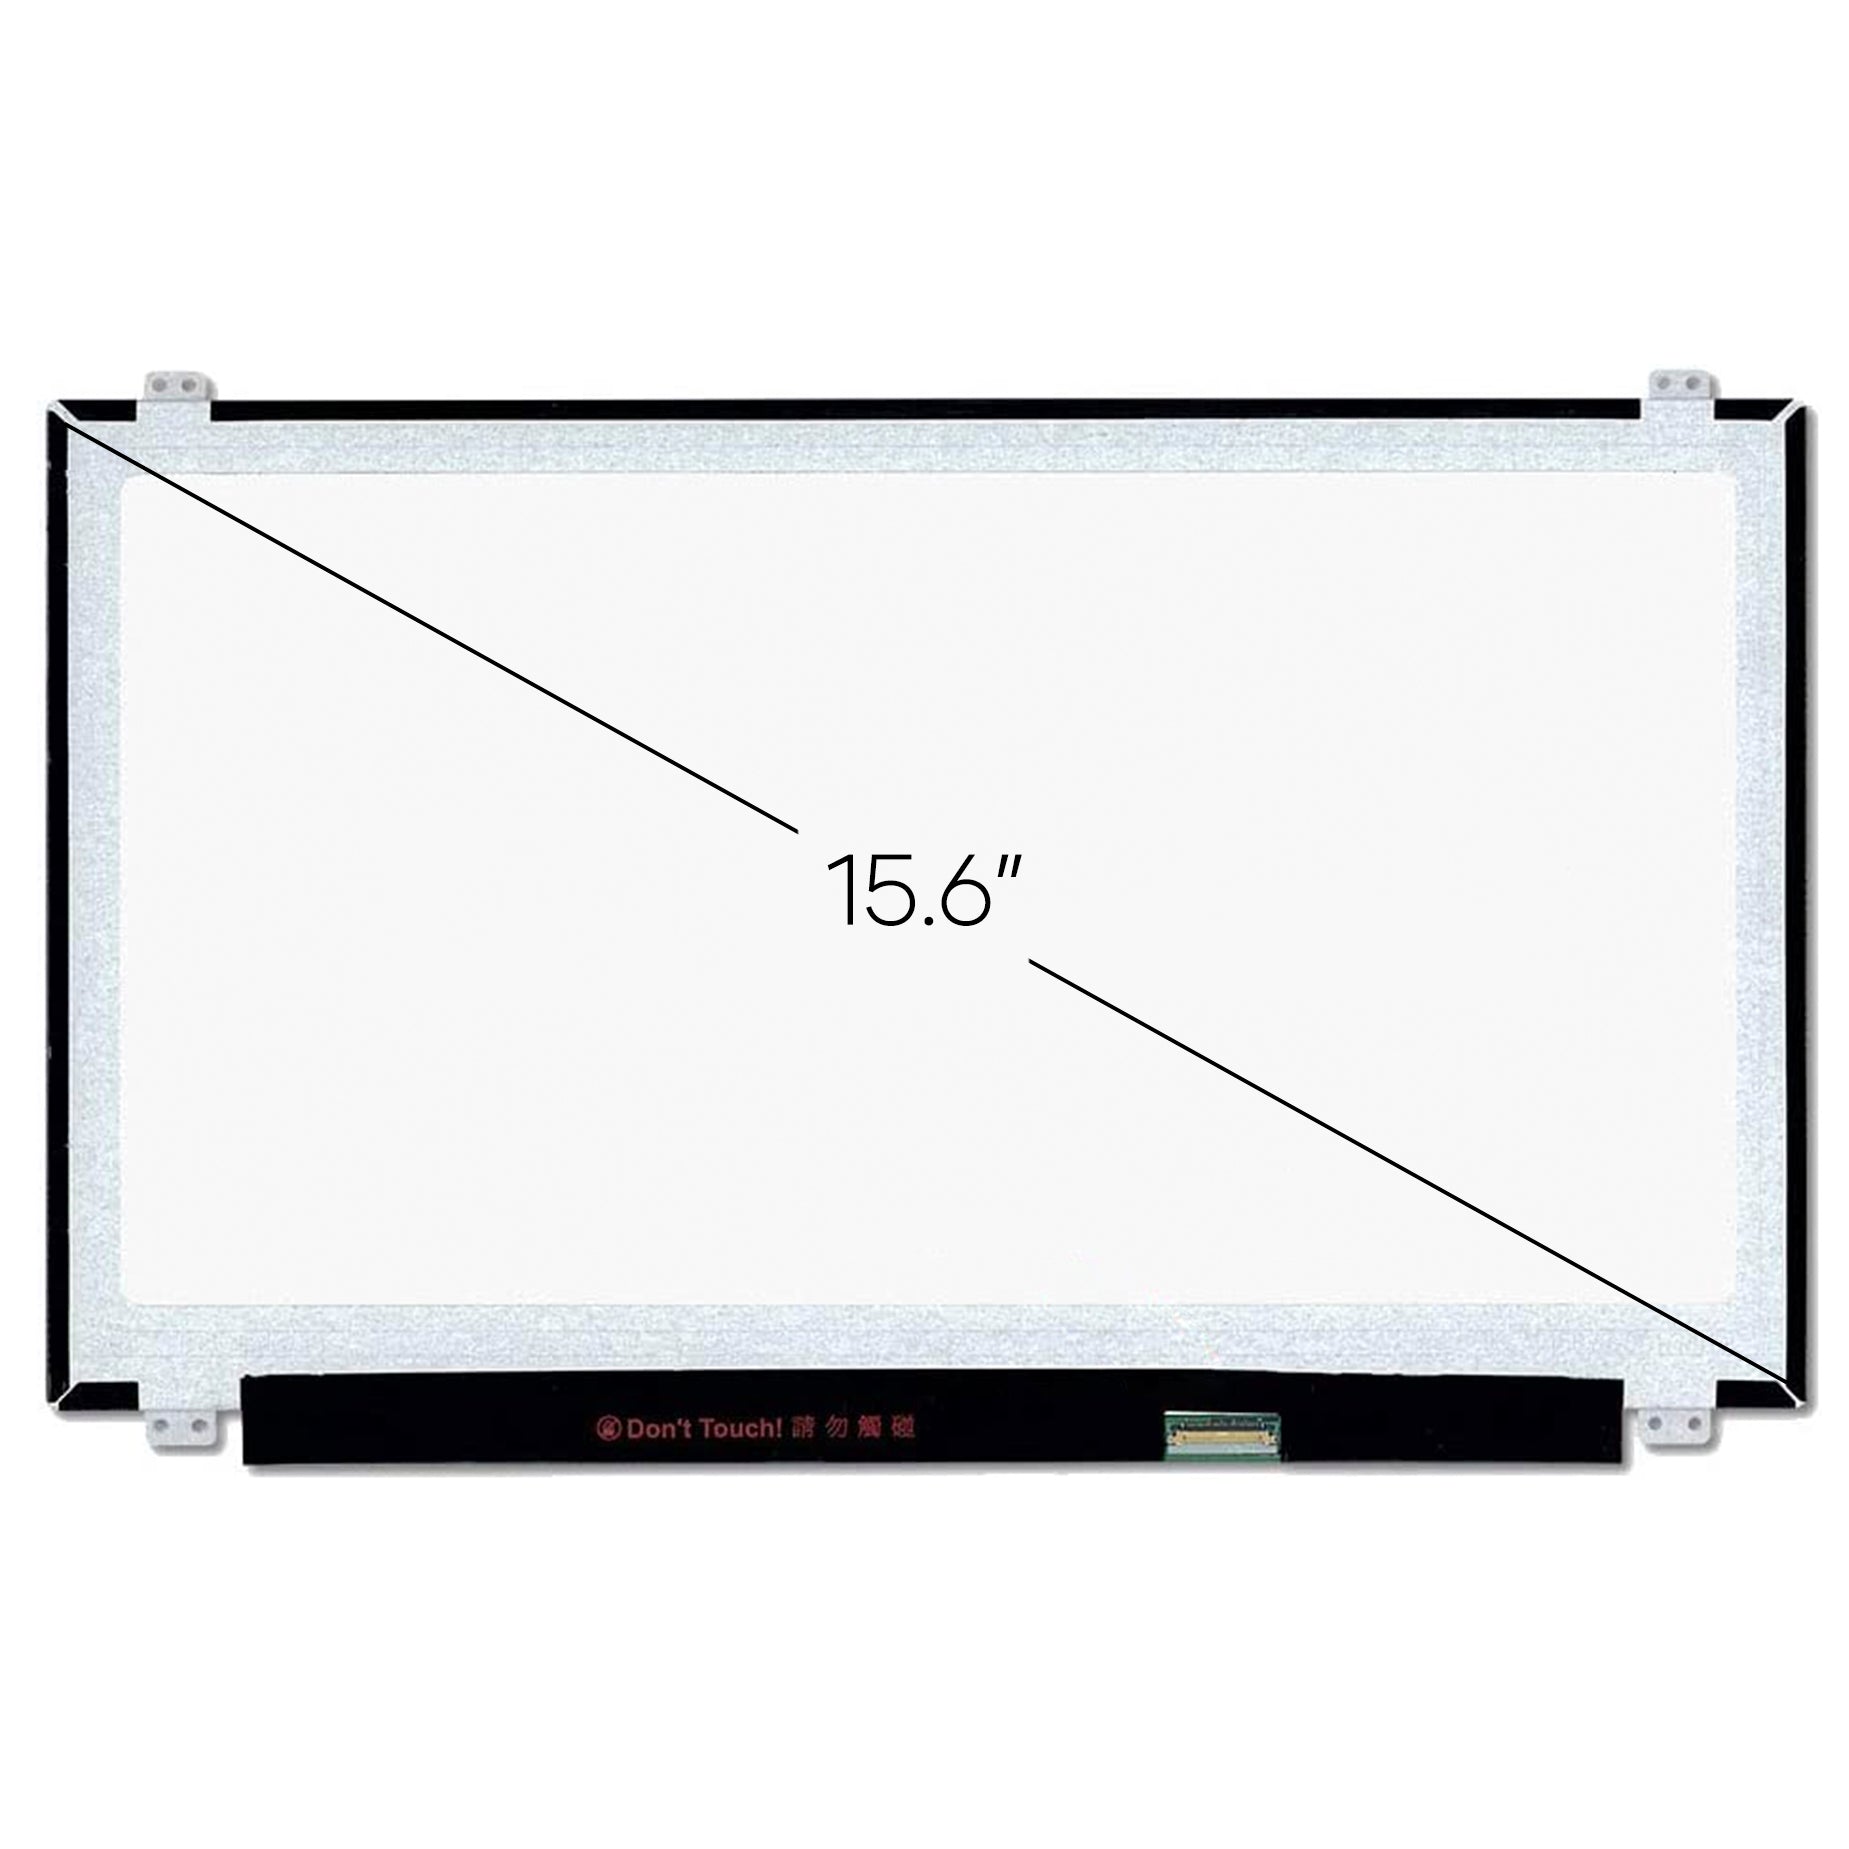 Screen Replacement for B156HTN03.1 FHD 1920x1080 Matte LCD LED Display